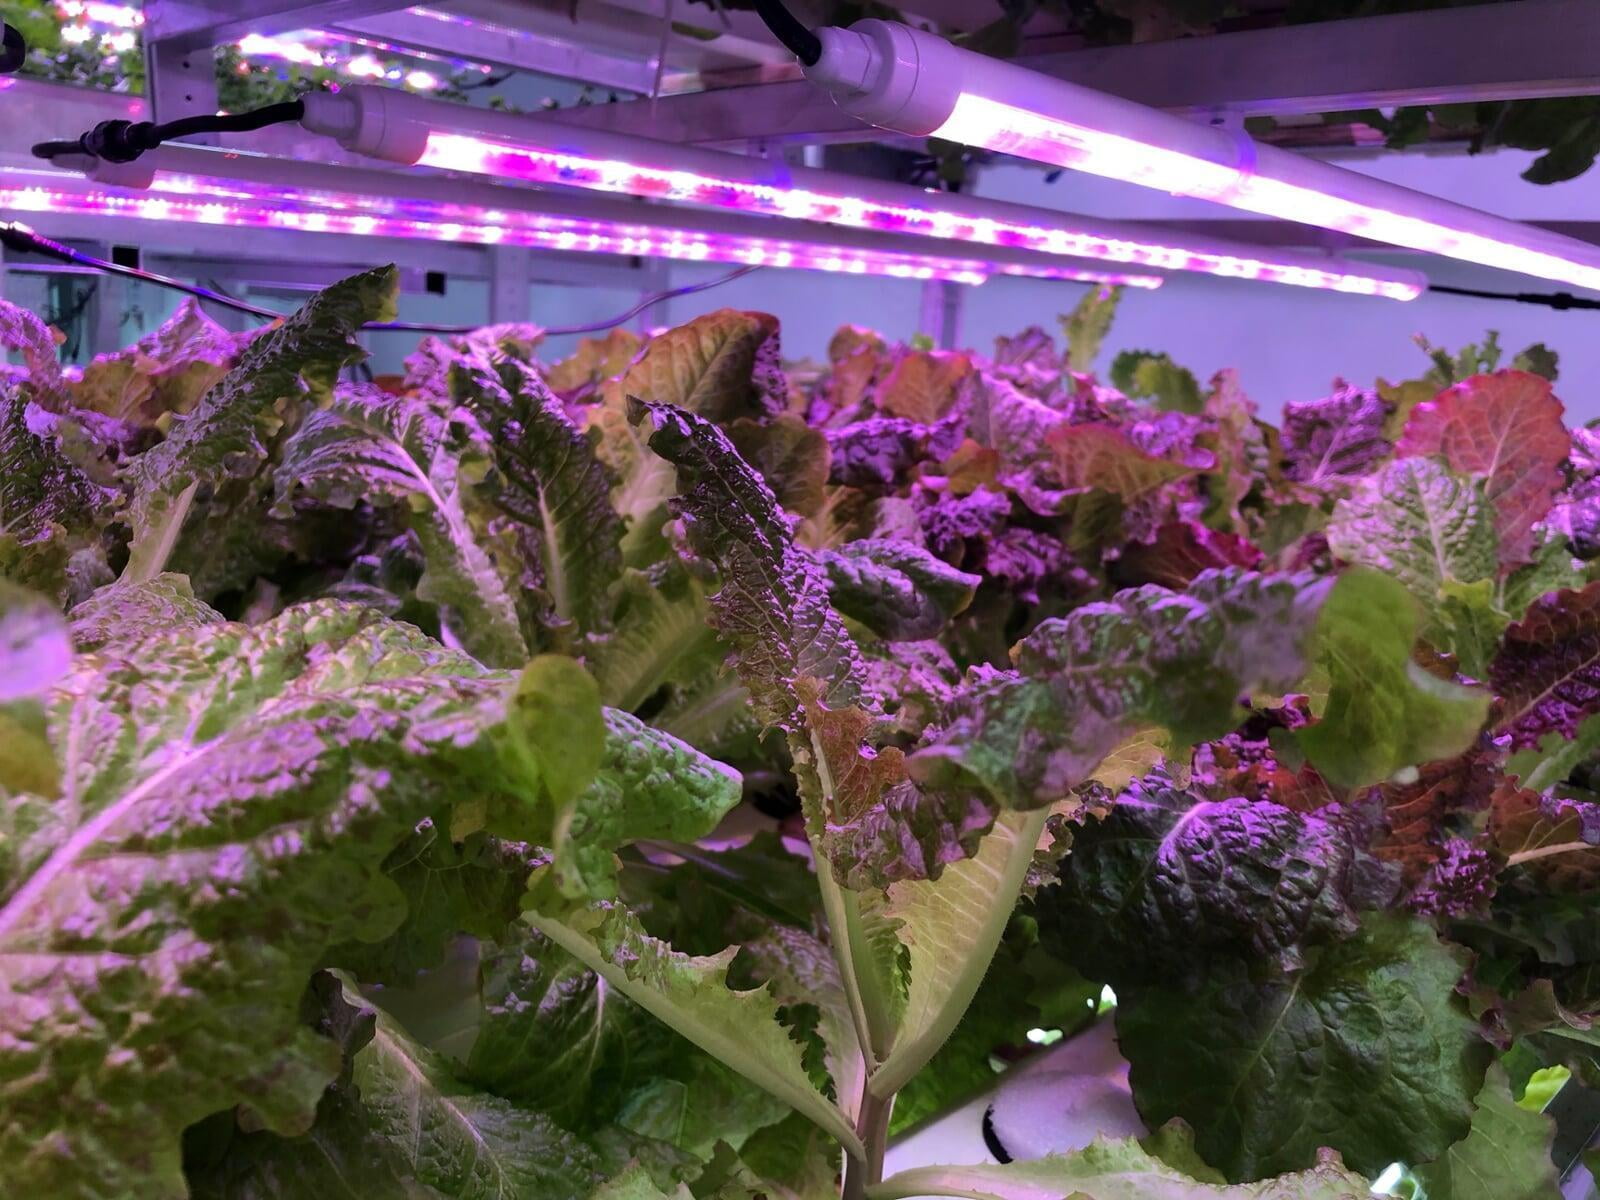 Why do Vertical Farms fail in India? Stop copying the west.